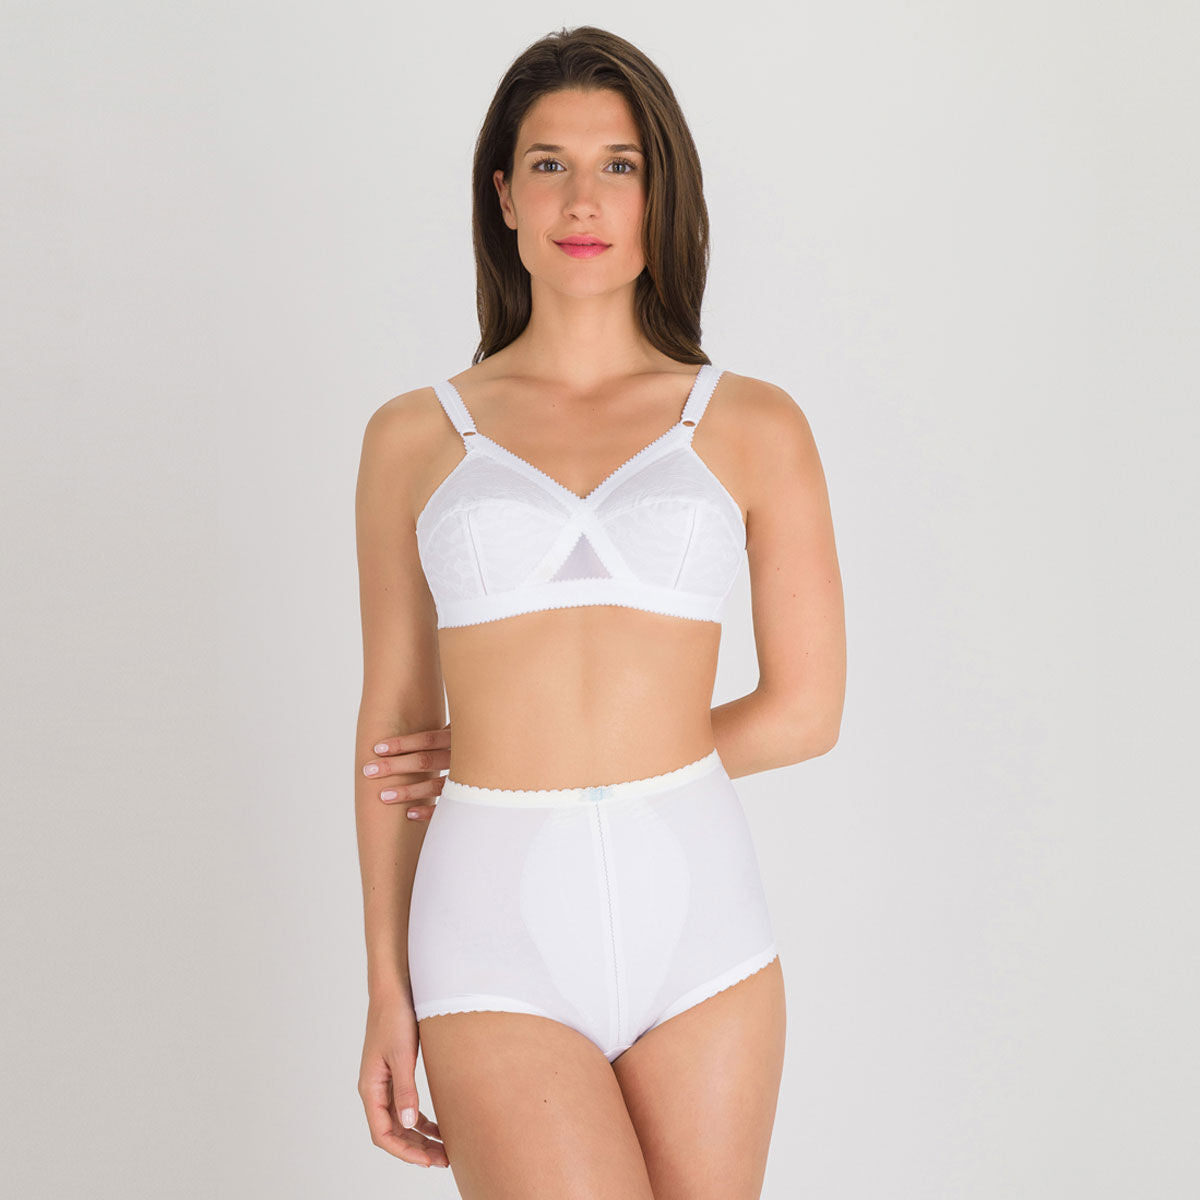 NEW IN BOX * Playtex Cross Your Heart Bra * Style 655 White Soft